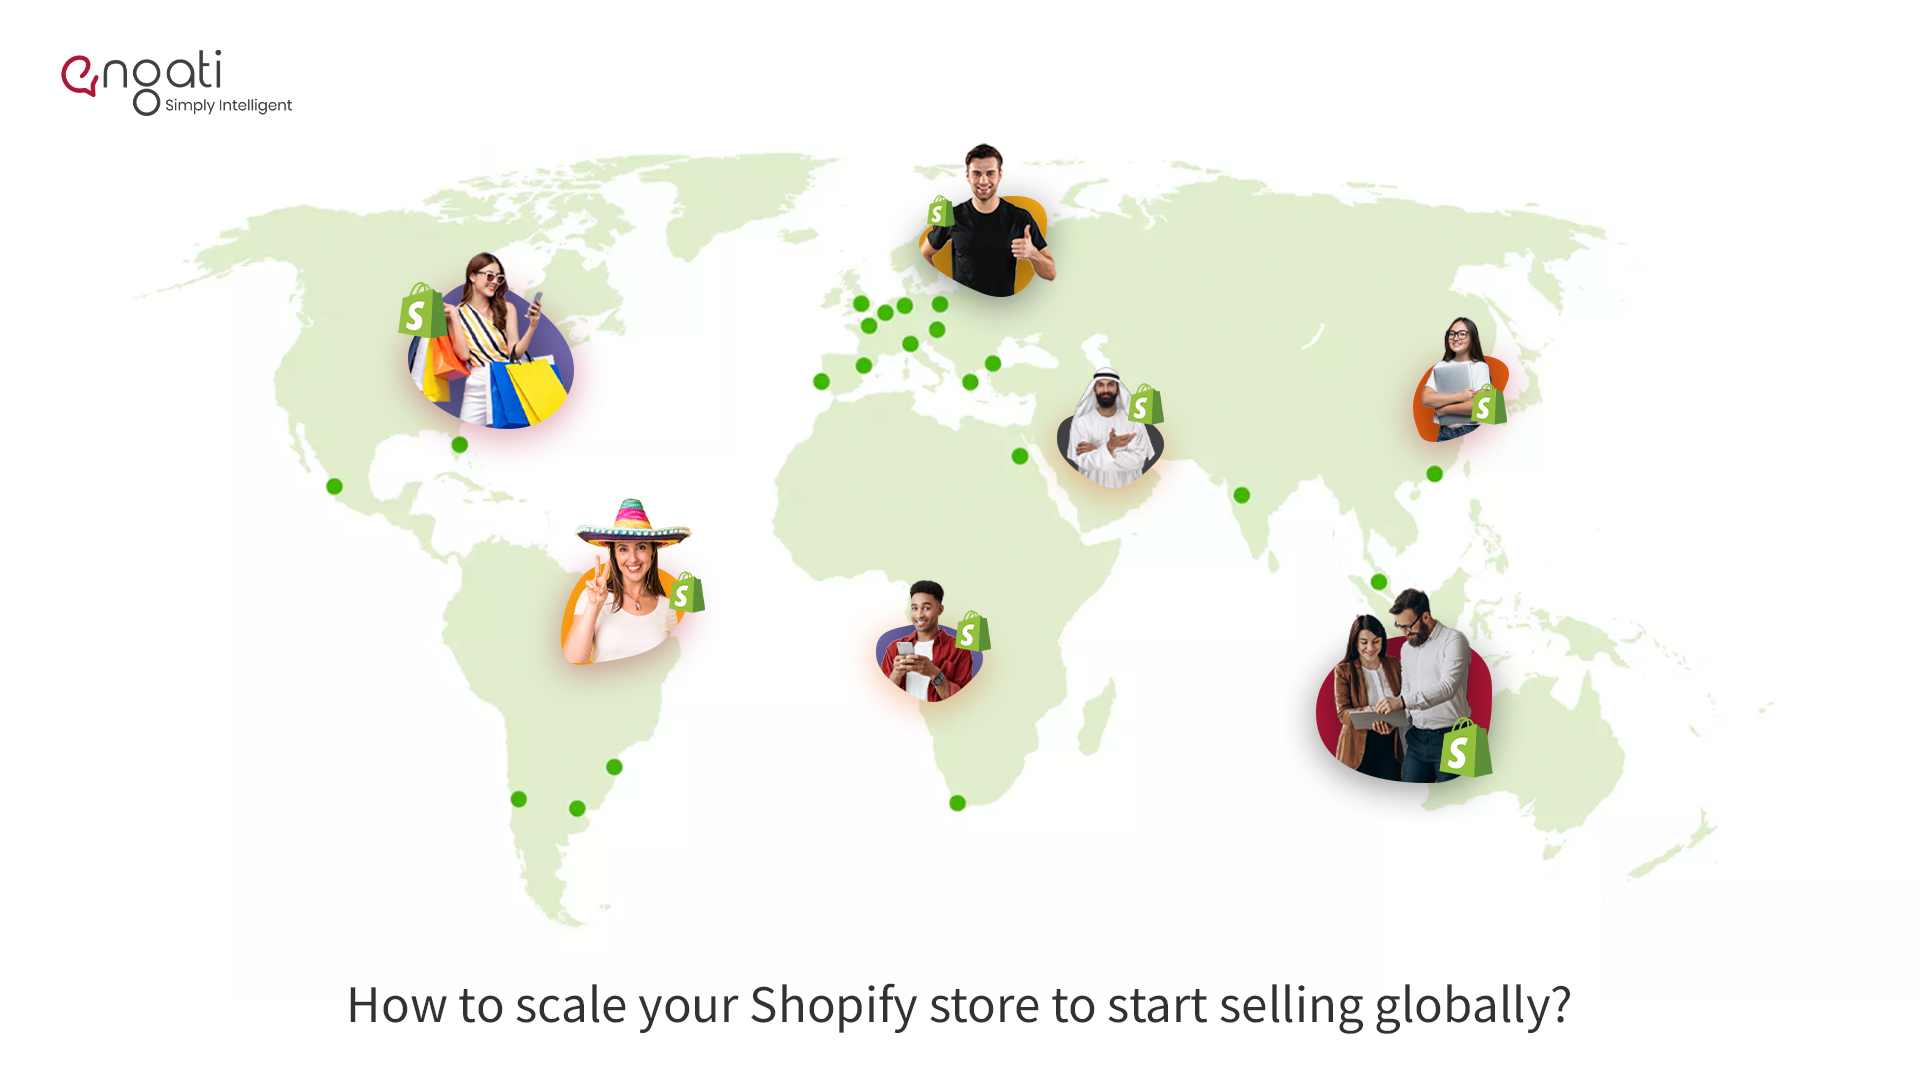 How to scale your Shopify Store to start selling globally?